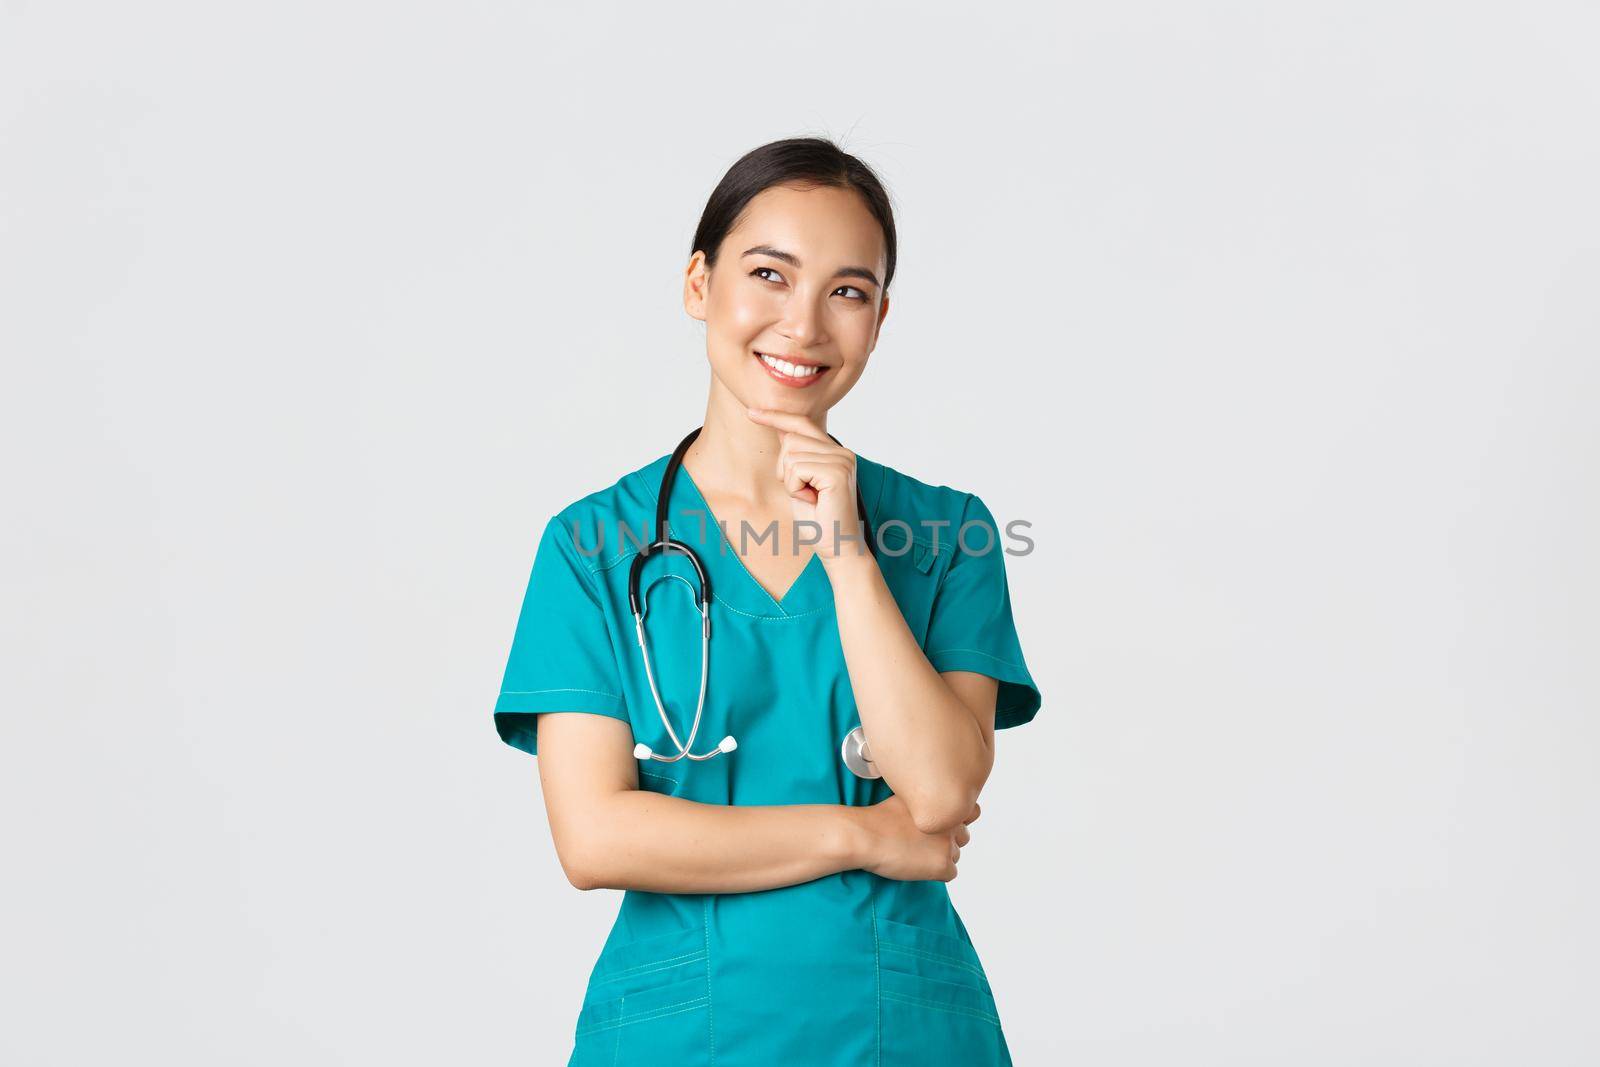 Covid-19, healthcare workers, pandemic concept. Smiling pleased attractive asian female doctor in scrubs, looking upper left corner and thinking, have idea, standing thoughtful white background.